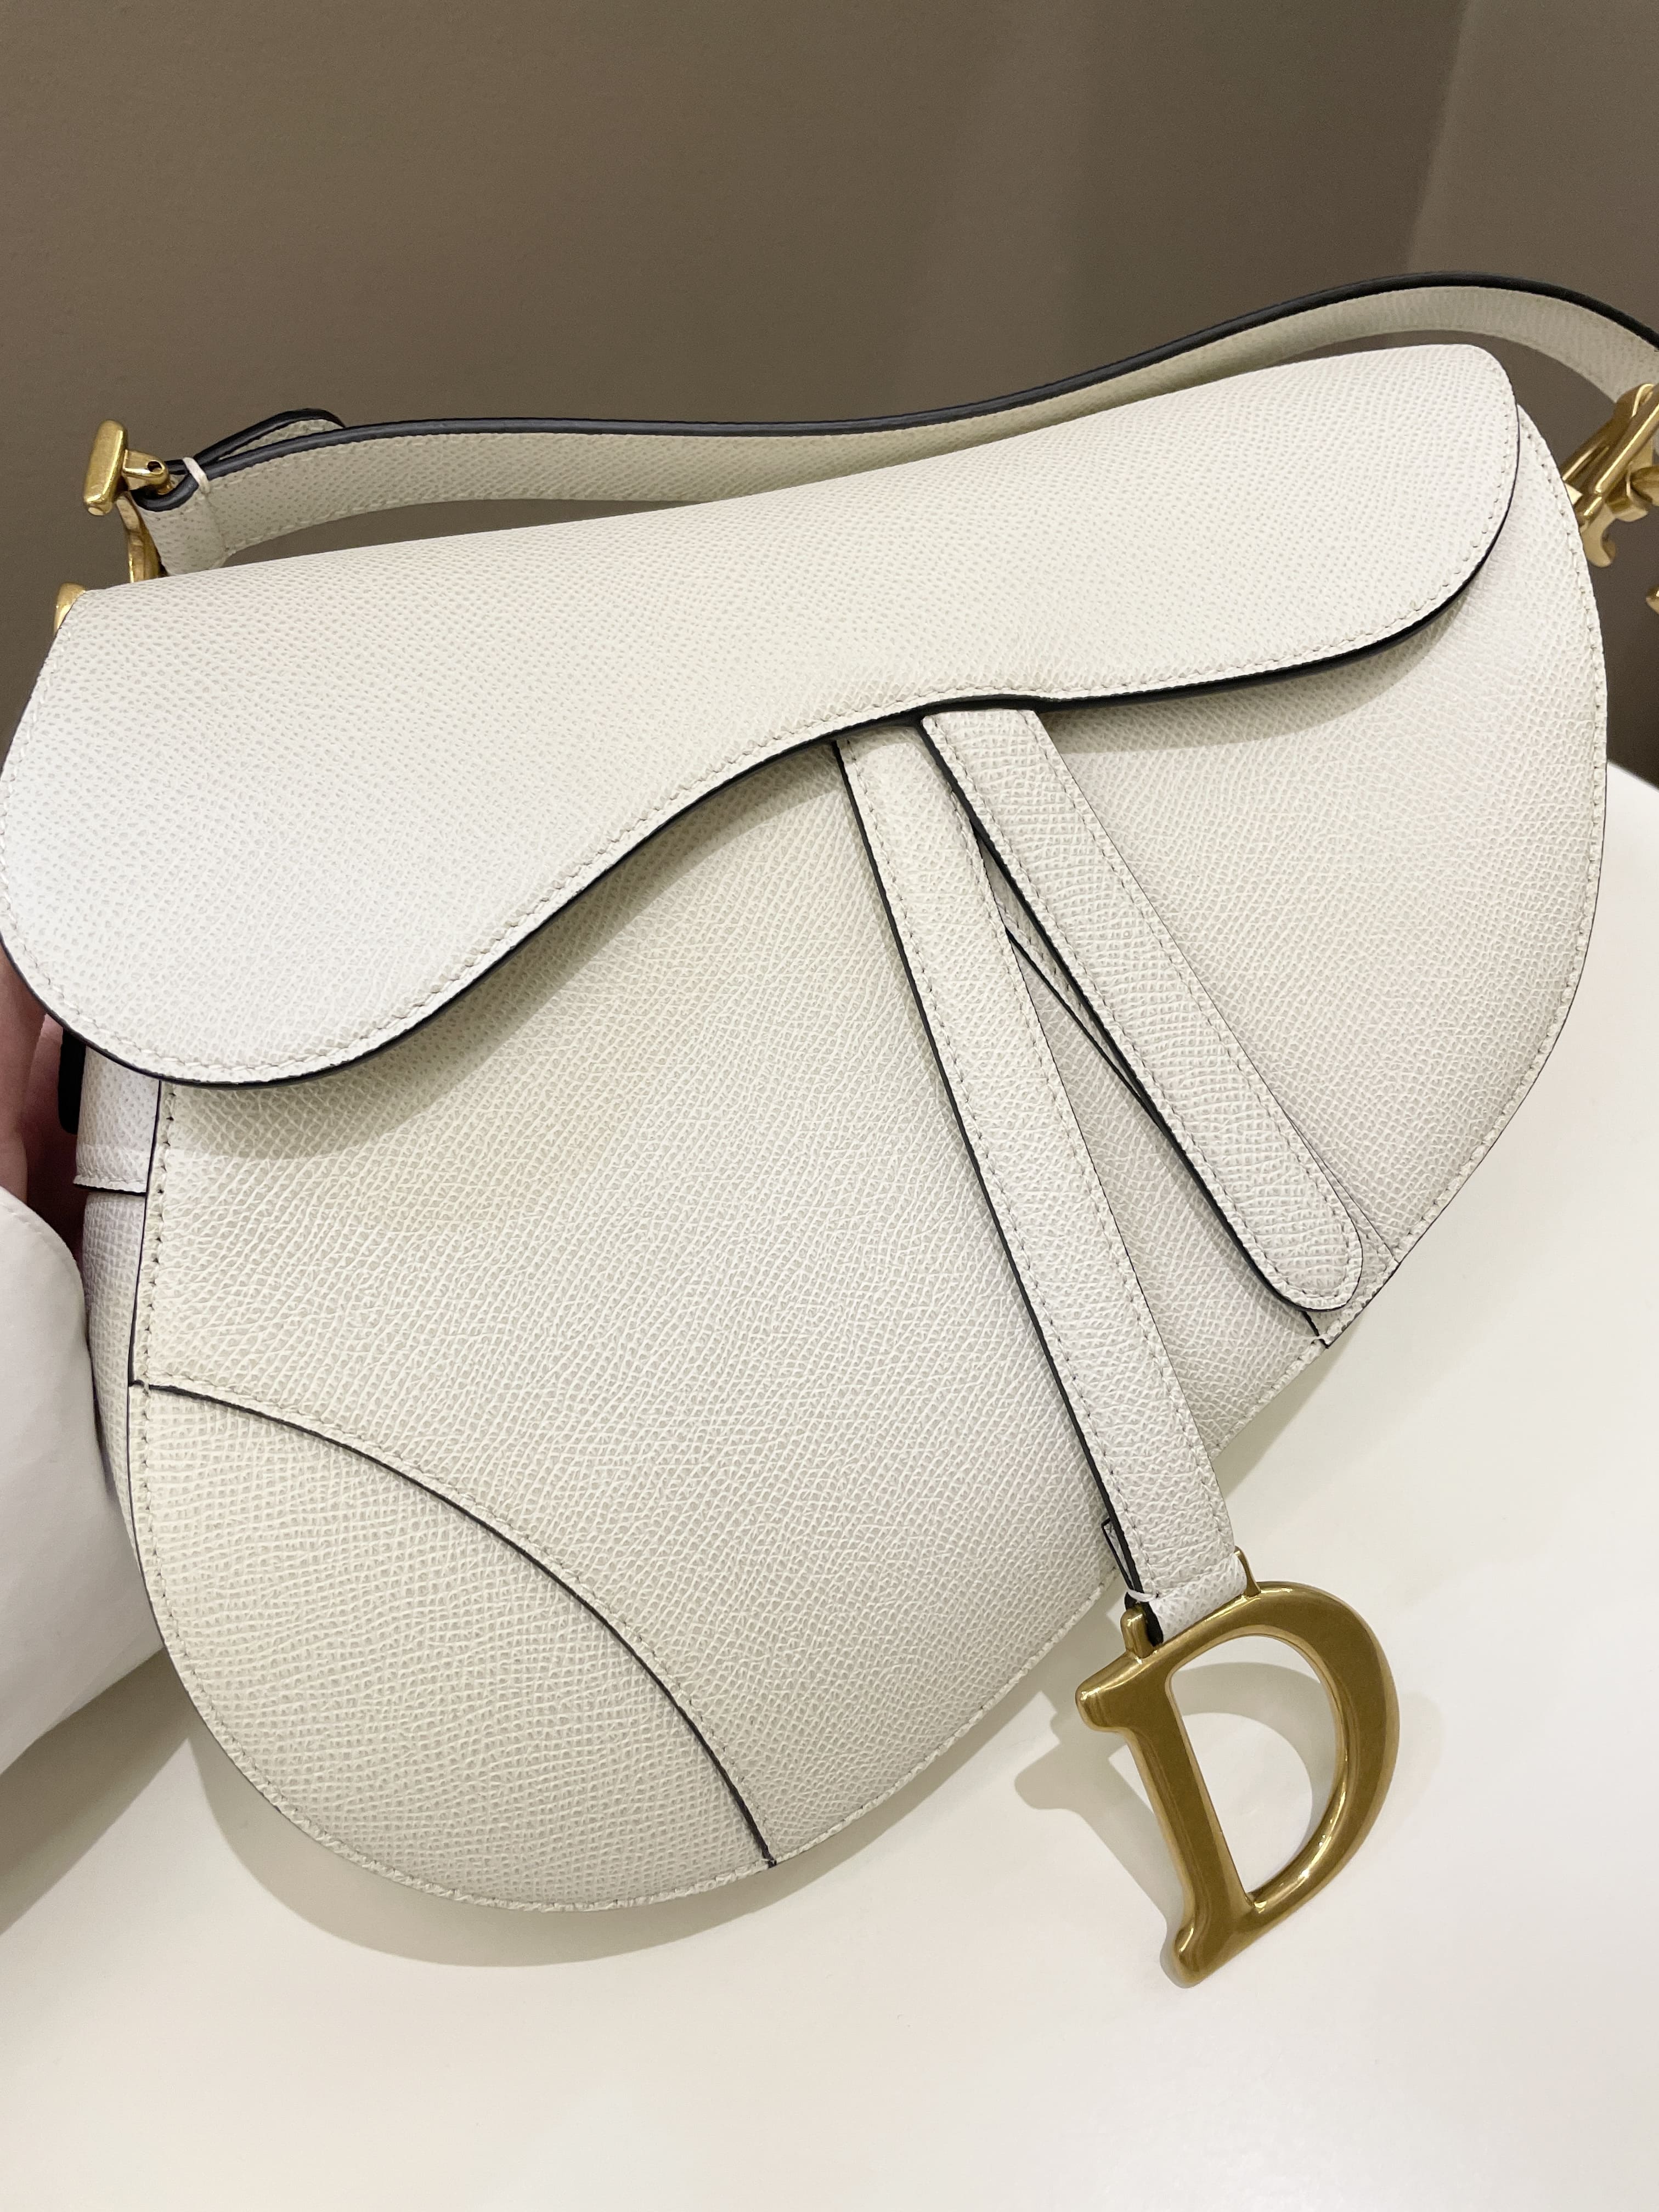 Dior Saddle Bag White Grained Leather | 3D model